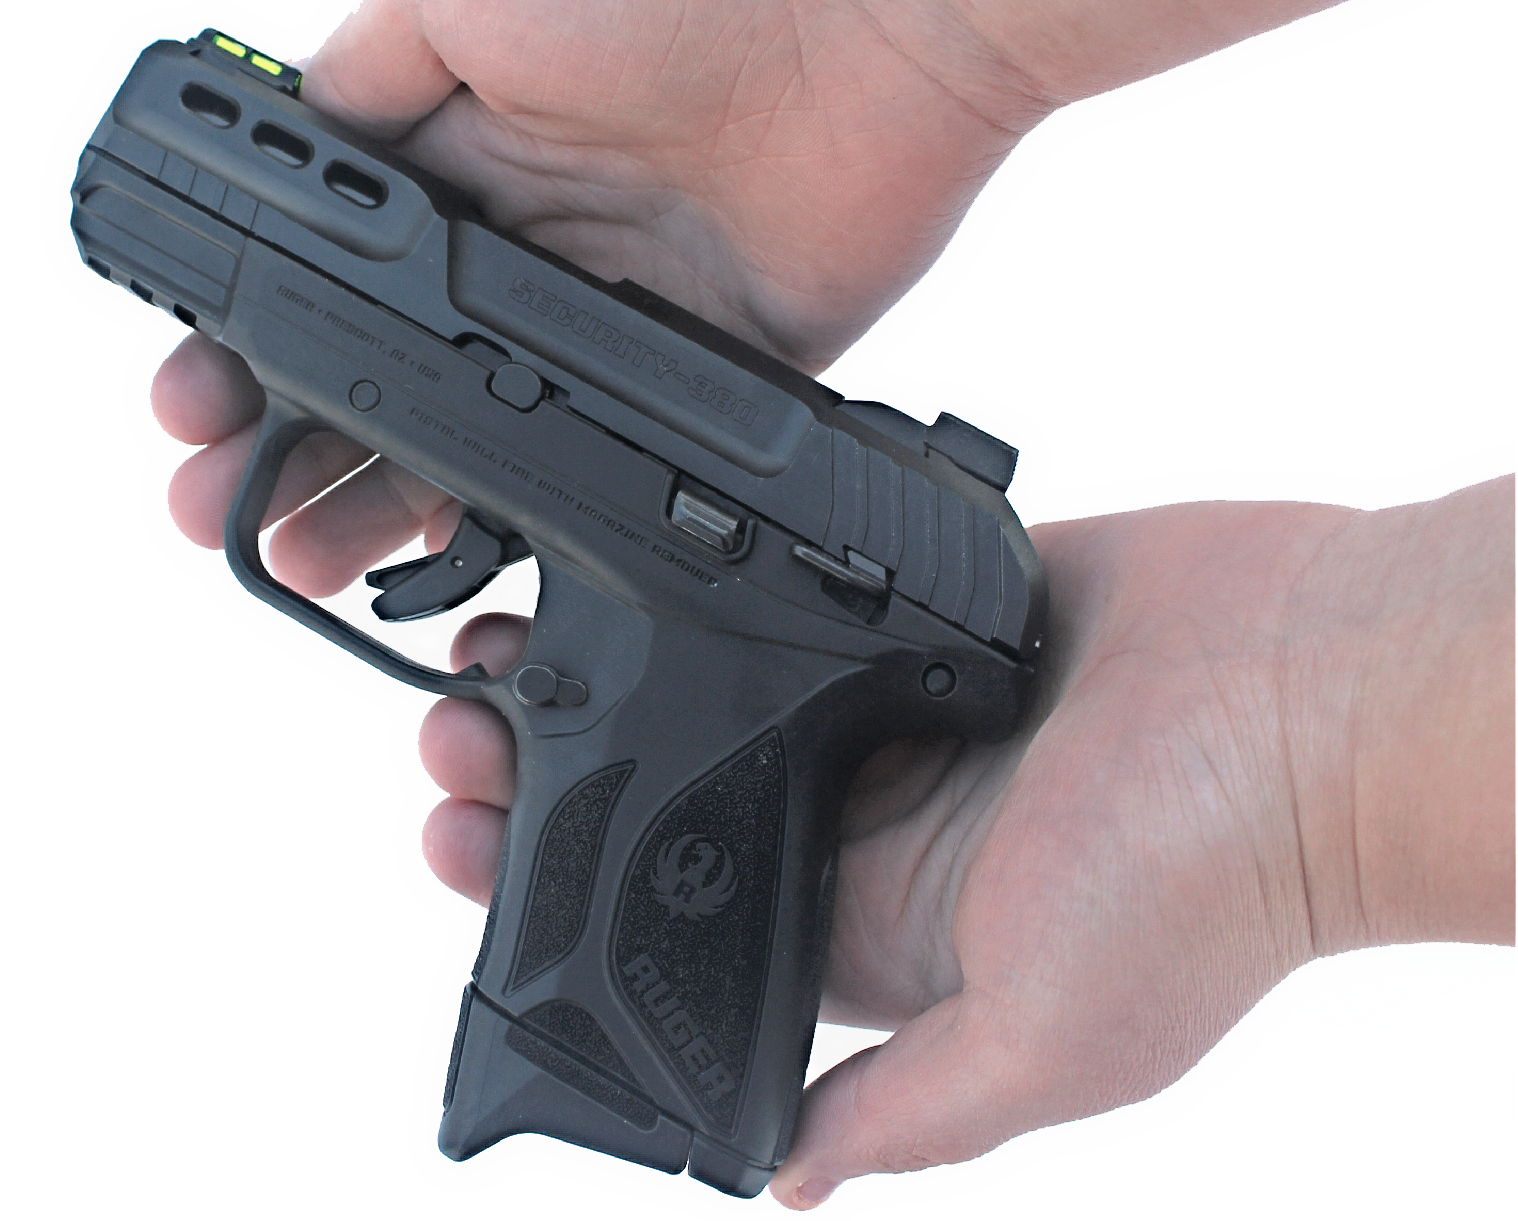 Ruger Security-380 Review: Better Than the LCP? - Pew Pew Tactical